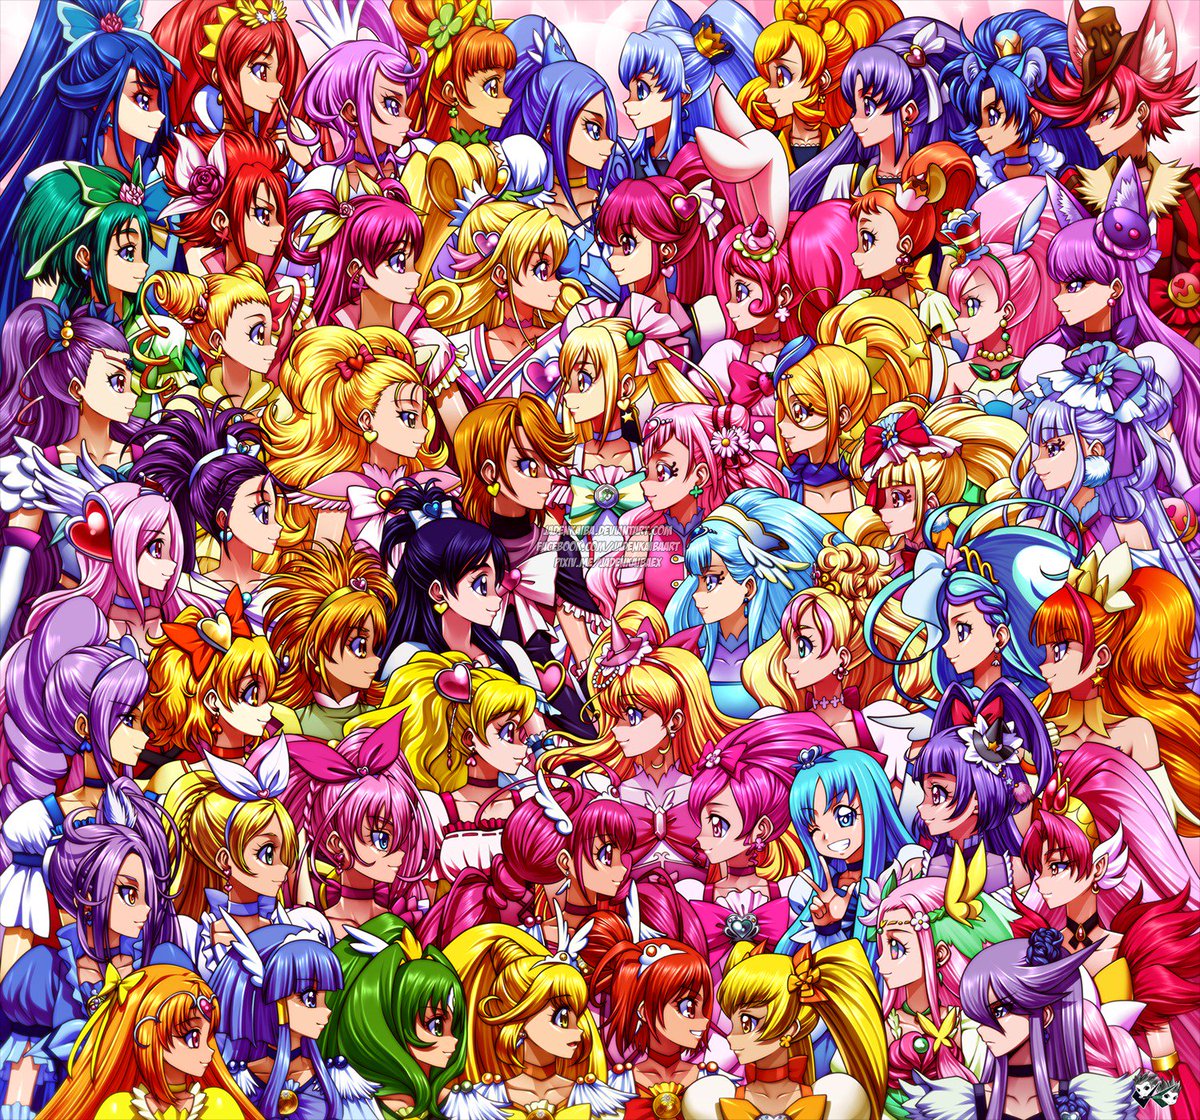 Jadenkaiba ジェイデンカイバ Fan Art Time With All 56 Precures Max Heart To Hugtto With Cure Echo A La Marvel Vs Capcom 1 Format For The 15th Anniversary Of The Pretty Cure